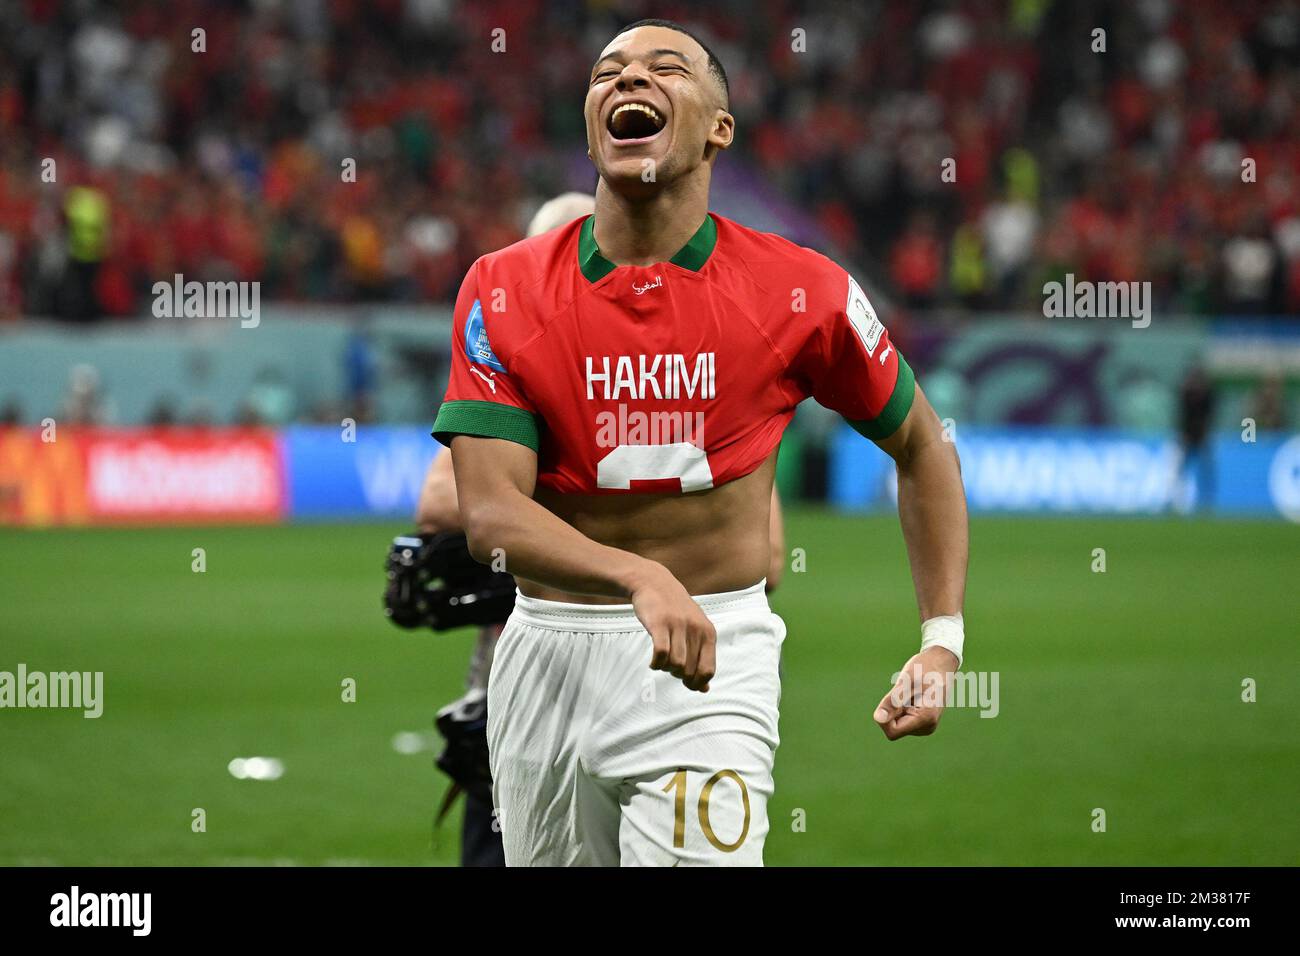 DOHA (QATAR), 12/14/2022 - WORLD CUP/FRANCE vs MOROCCO - Wearing the shirt of HAKIMI Achraf, from Morocco, MBAPPE Kylian celebrates his victory and classification after the match between the teams of France vs Morocco, for the semifinal of the Qatar 2022 World Cup/Fifa, at Al Bayt Stadium, in Doha, this Wednesday (14). Photo by Alexandre Brum/Ag. frame 31119 (Alexandre Brum/Ag. Enquadrar/SPP) Credit: SPP Sport Press Photo. /Alamy Live News Stock Photo